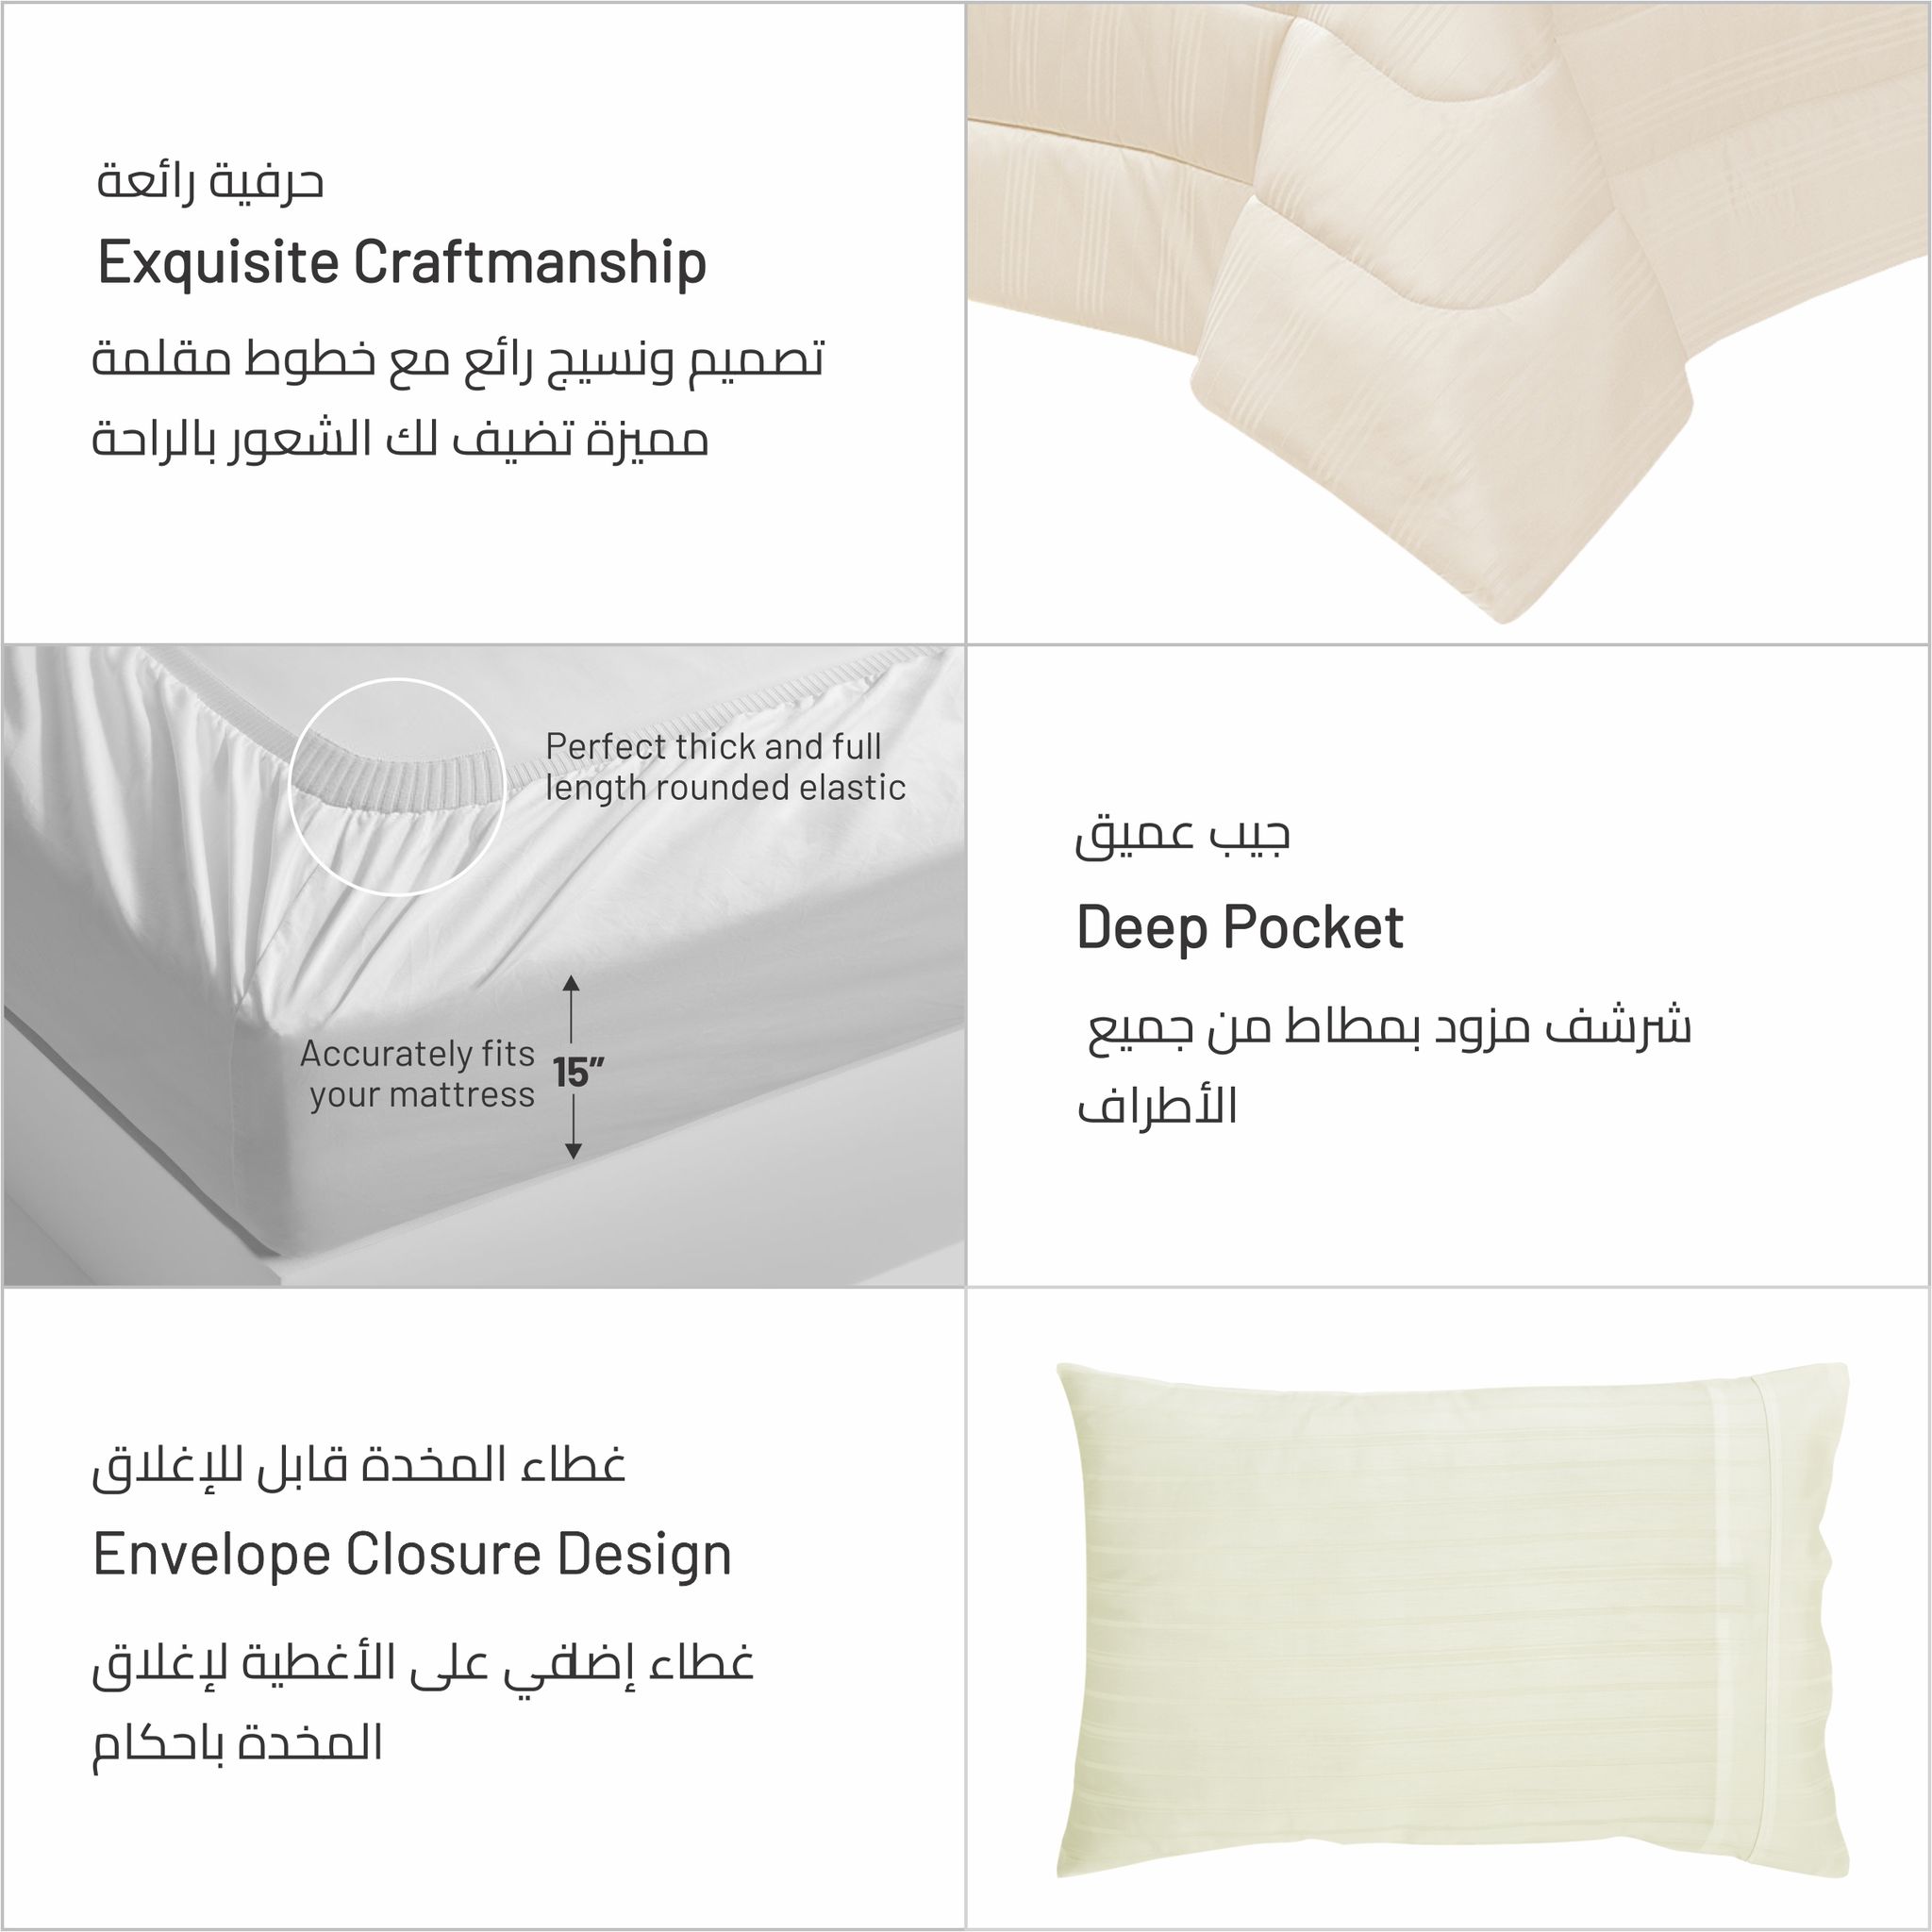 6-Piece Italian Jacquard  Hotel  Comforter  ,Verigated Stripes Quilted ,King 260 x 240 Cms ,Cream